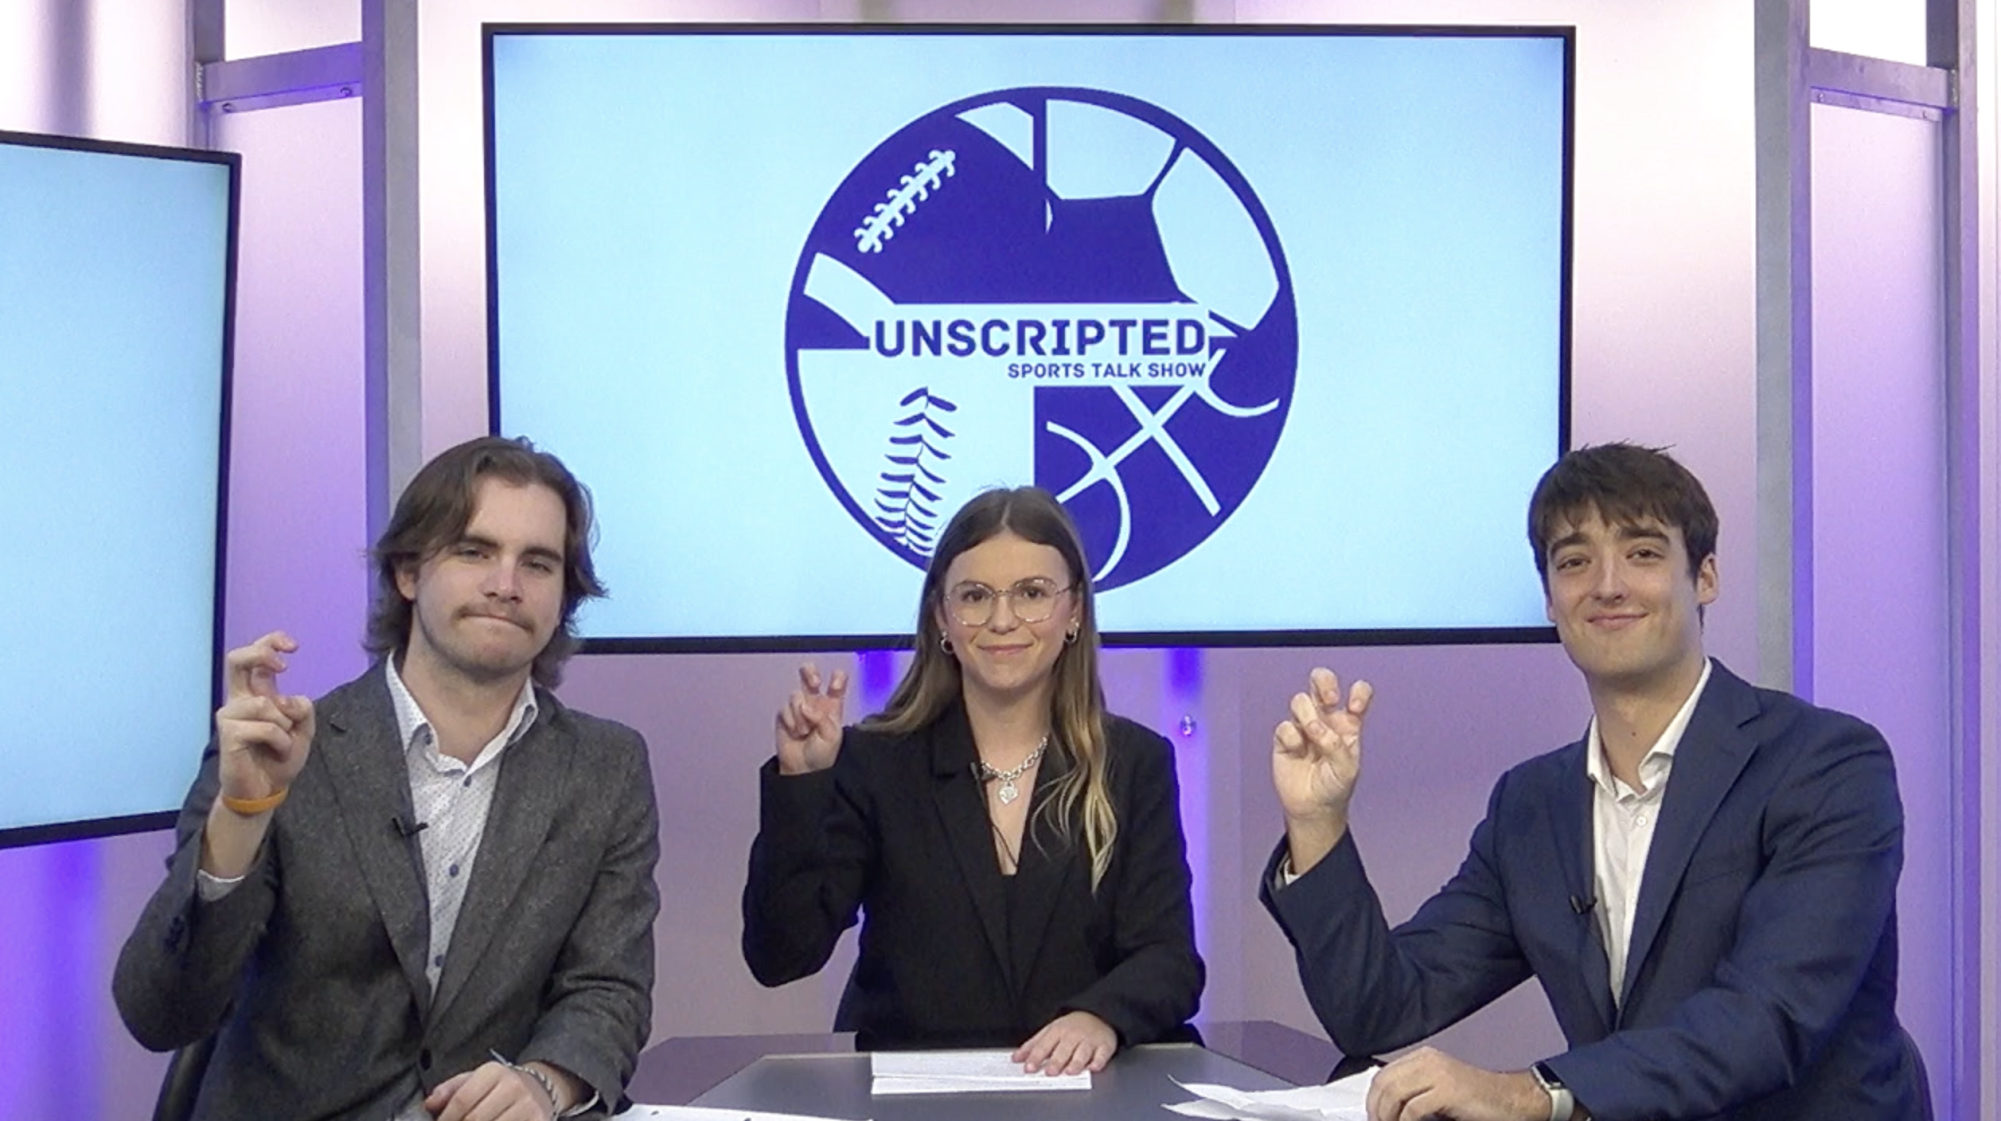 Unscripted: Rangers win their first World Series, Mavericks hot start, mid-season NFL awards and more